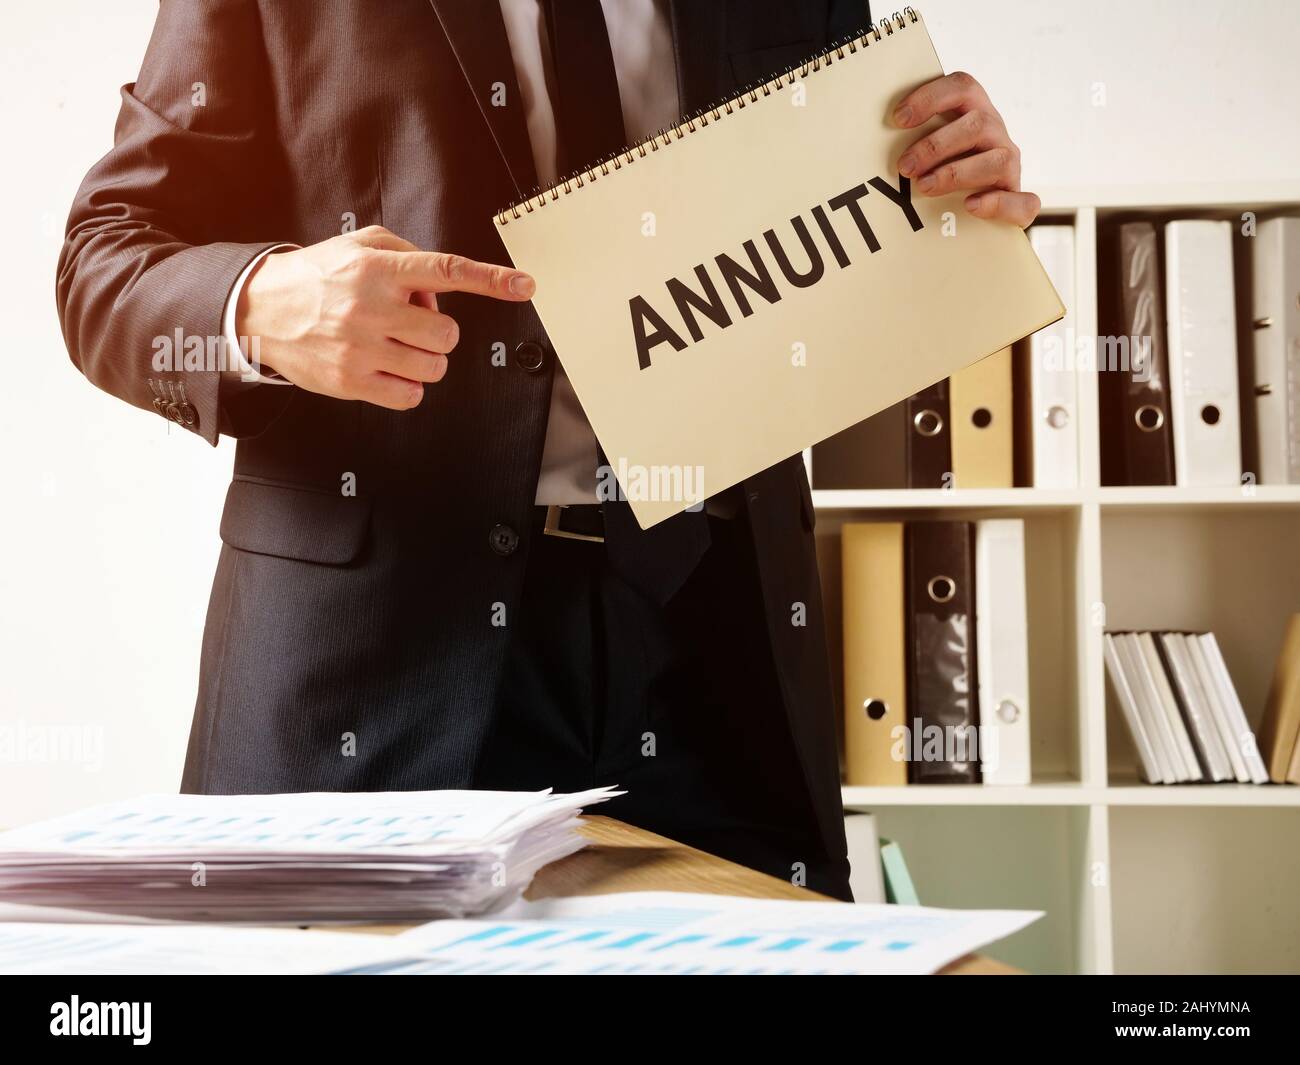 Annuity sign in the book that holds manager. Stock Photo